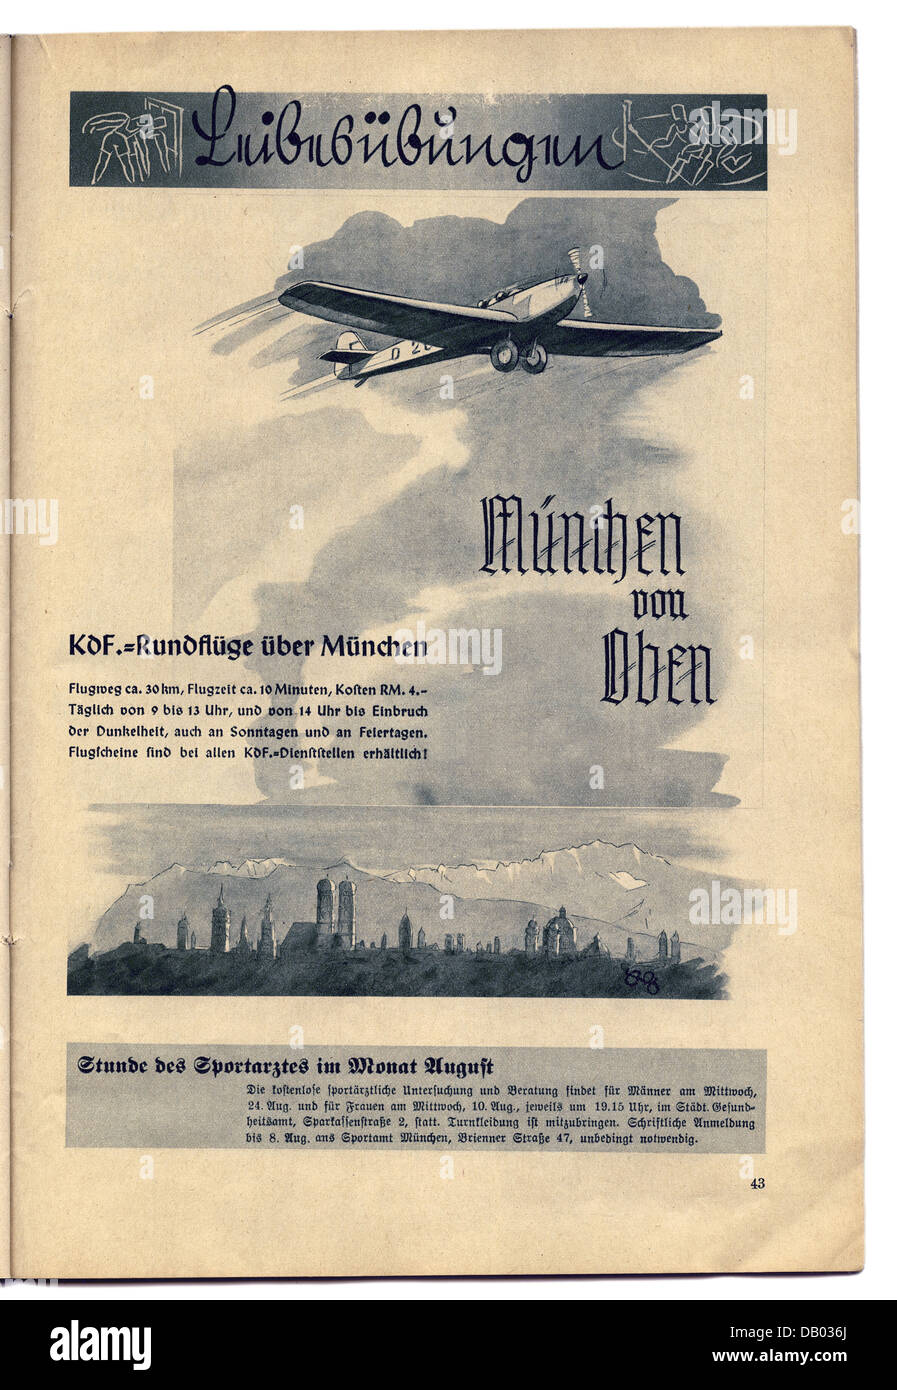 National Socialism, organisations, 'Strength Through Joy' ('Kraft durch Freude', KDF), program magazine of Gau Munich-Upper Bavaria, August 1938, advert, sightseeing flight Munich from above, , Additional-Rights-Clearences-Not Available Stock Photo